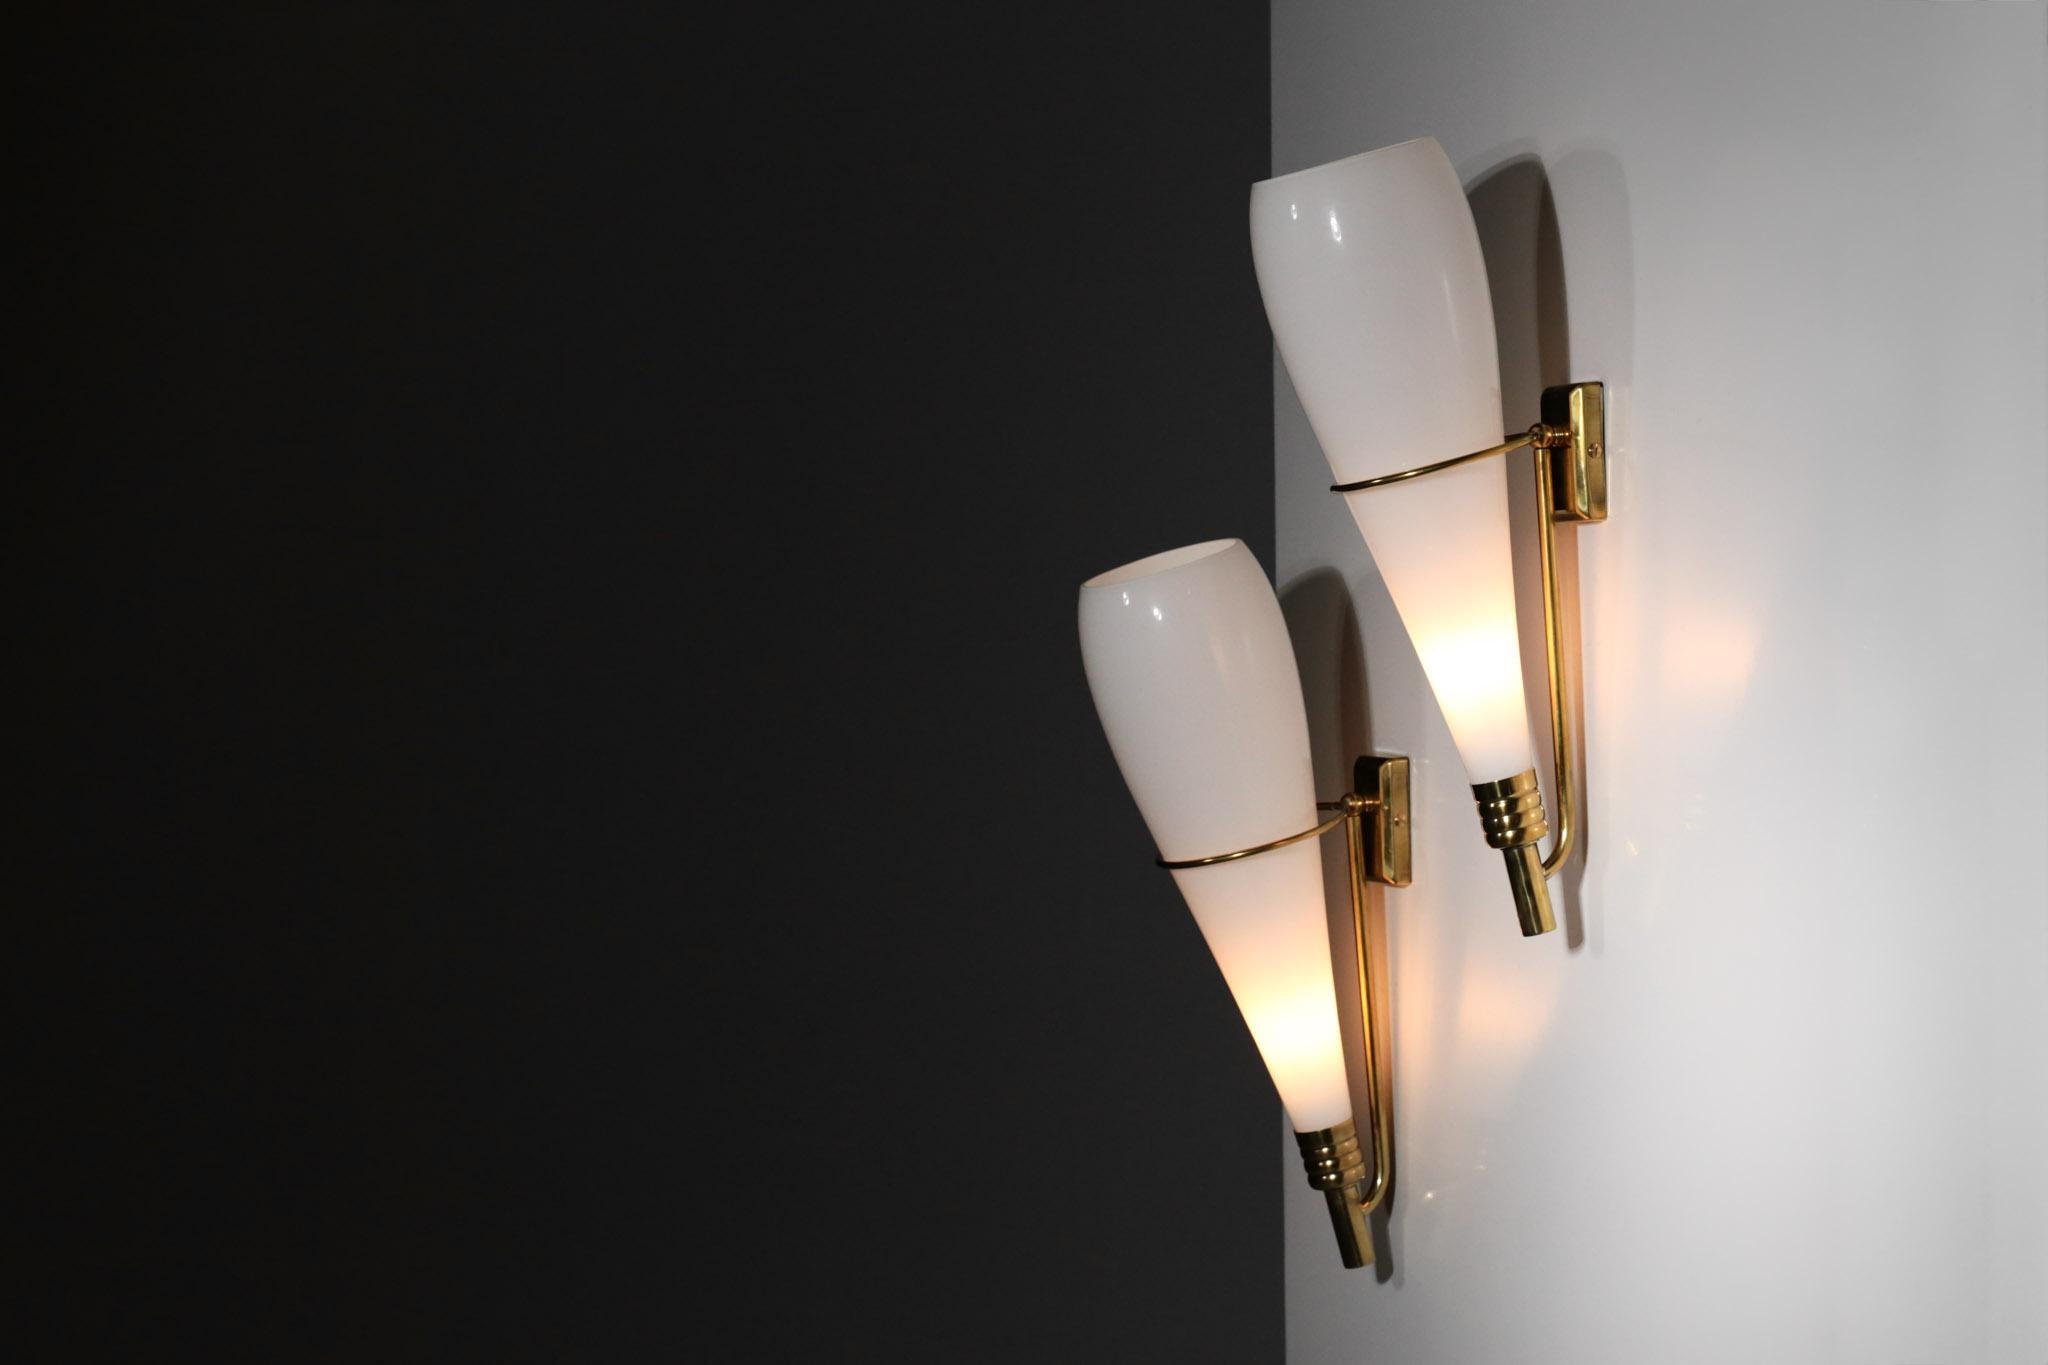 Pair of Large Italian Style Arredoluce Stilnovo Wall Lights Design Brass Opalin In Excellent Condition For Sale In Lyon, FR